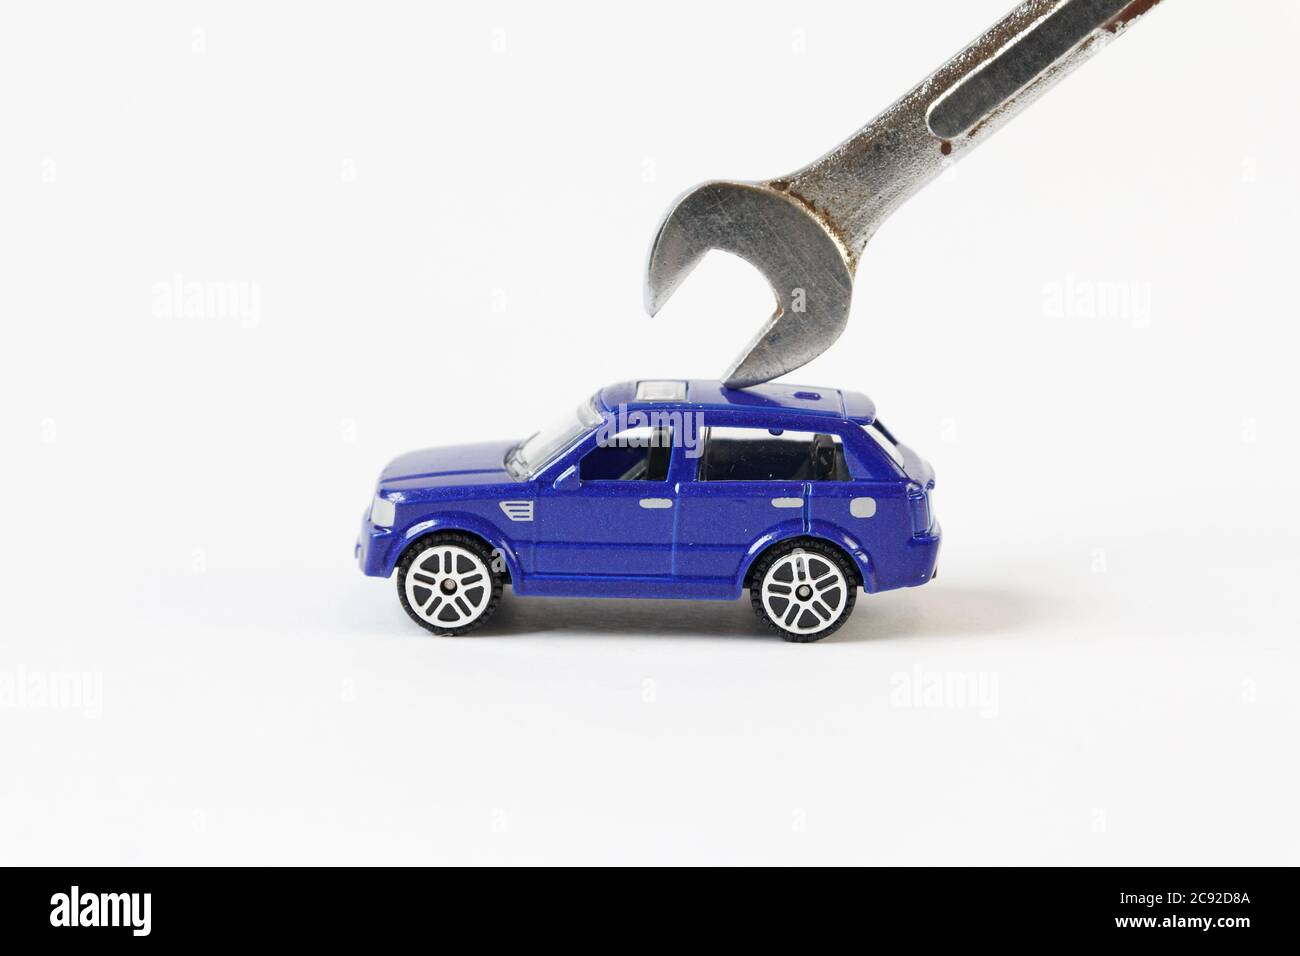 Concept of car repairing and maintenance. The toy car repair with wrench. Stock Photo